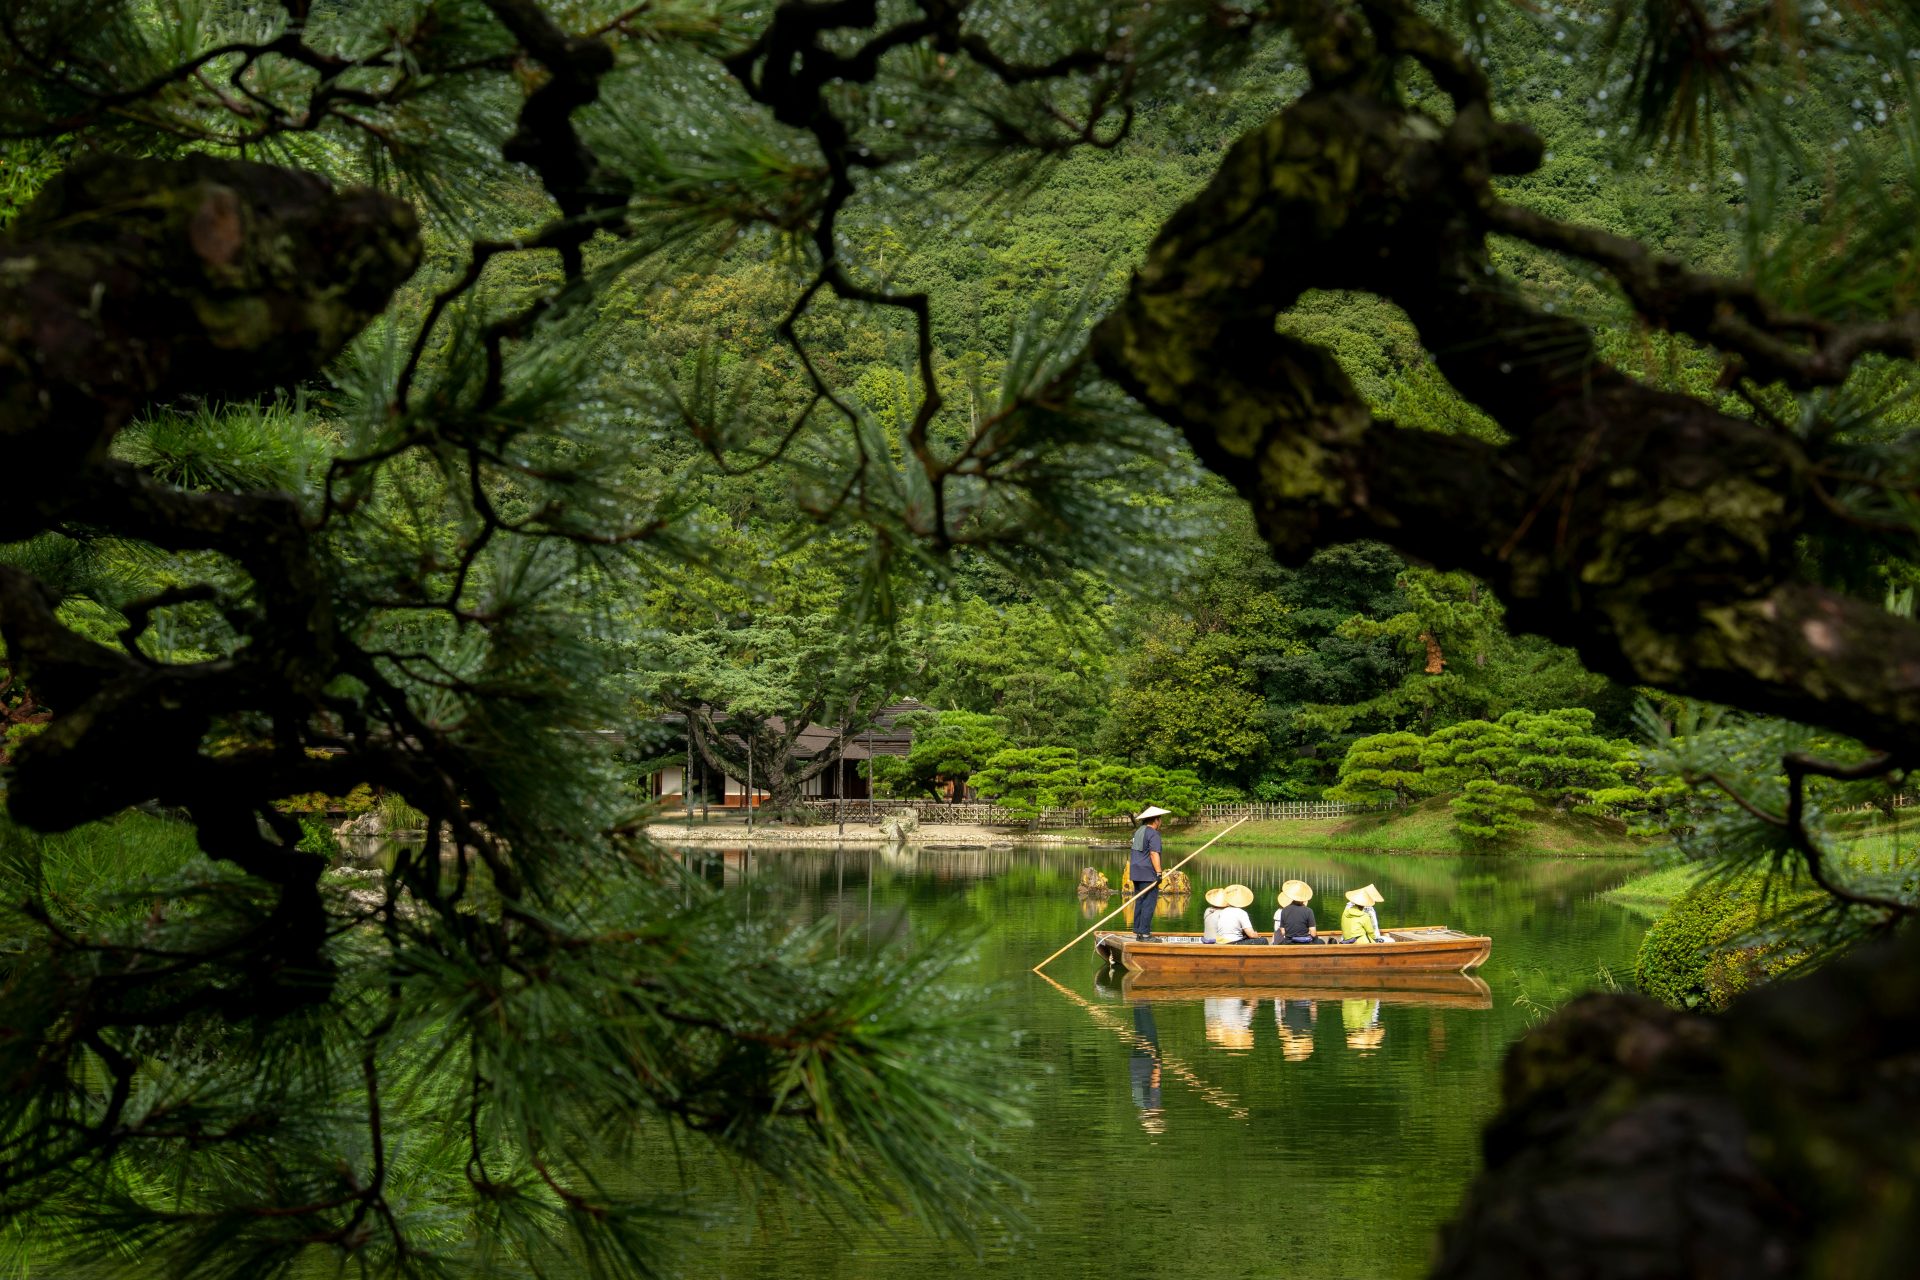 <p>The largest cultural property garden in Japan, Ritsurin Park has six ponds and thirteen artificial mountains within its terrain of approximately 75 hectares.</p> <p>Image: H C / Unsplash</p>